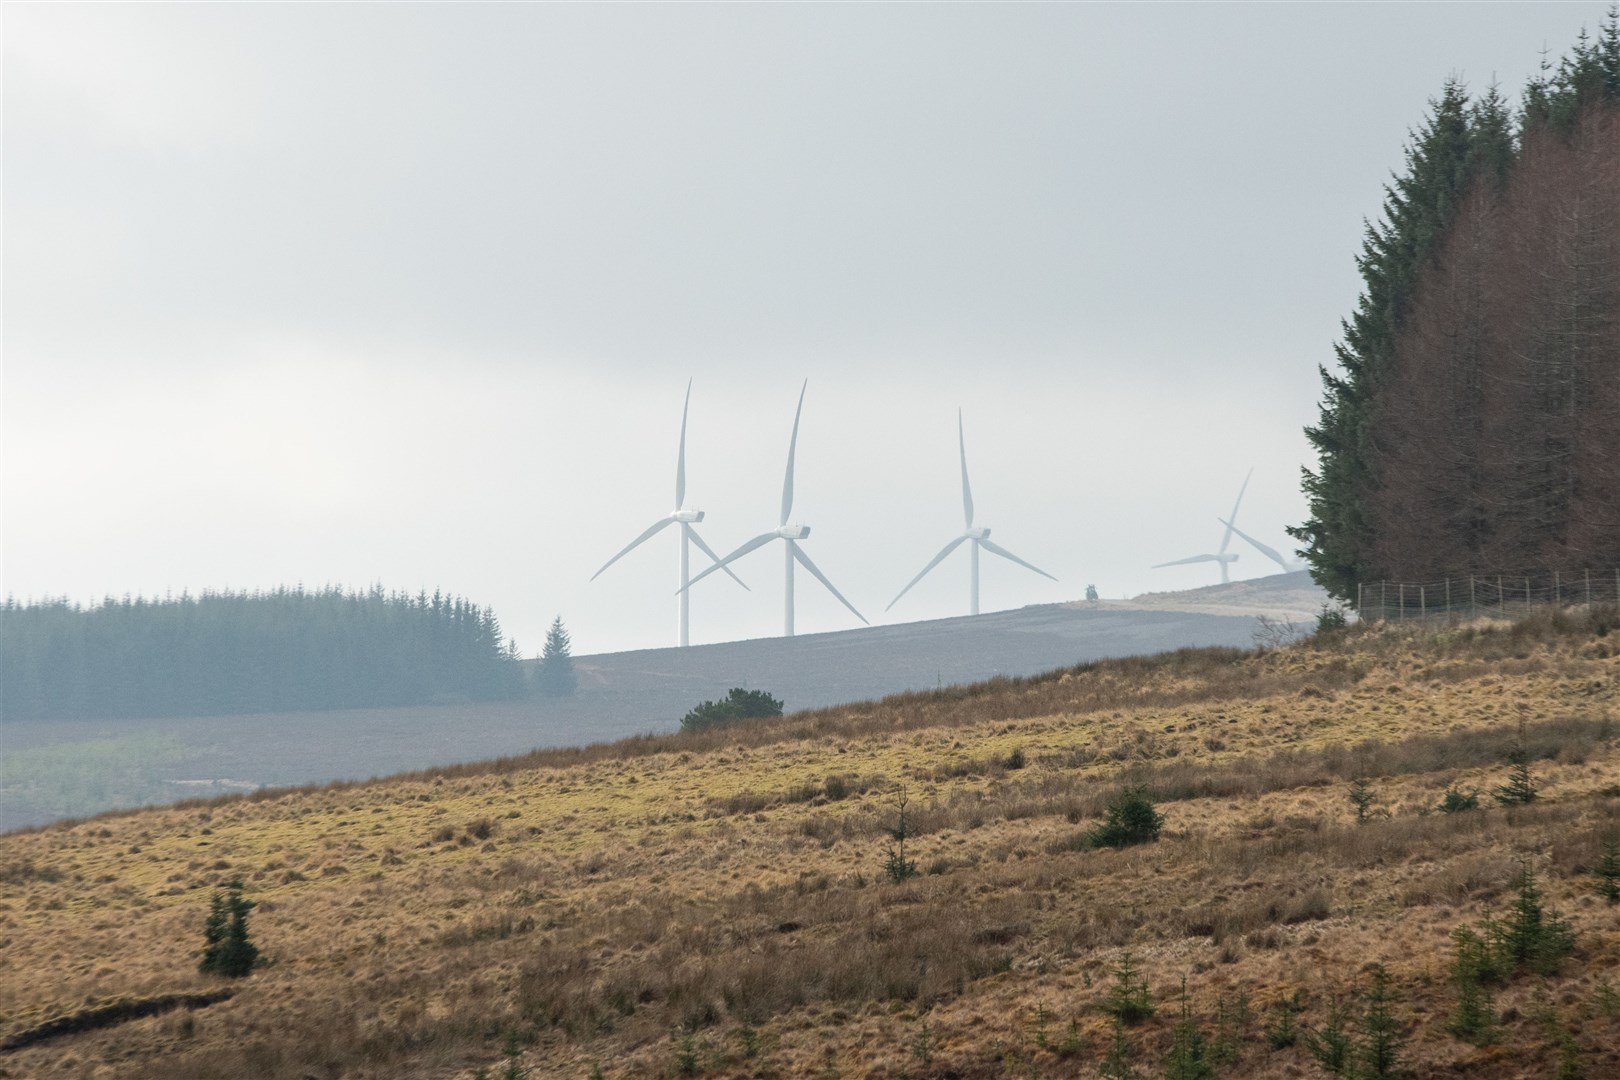 The Cabrach is already home to 77 wind turbines. Picture: Daniel Forsyth